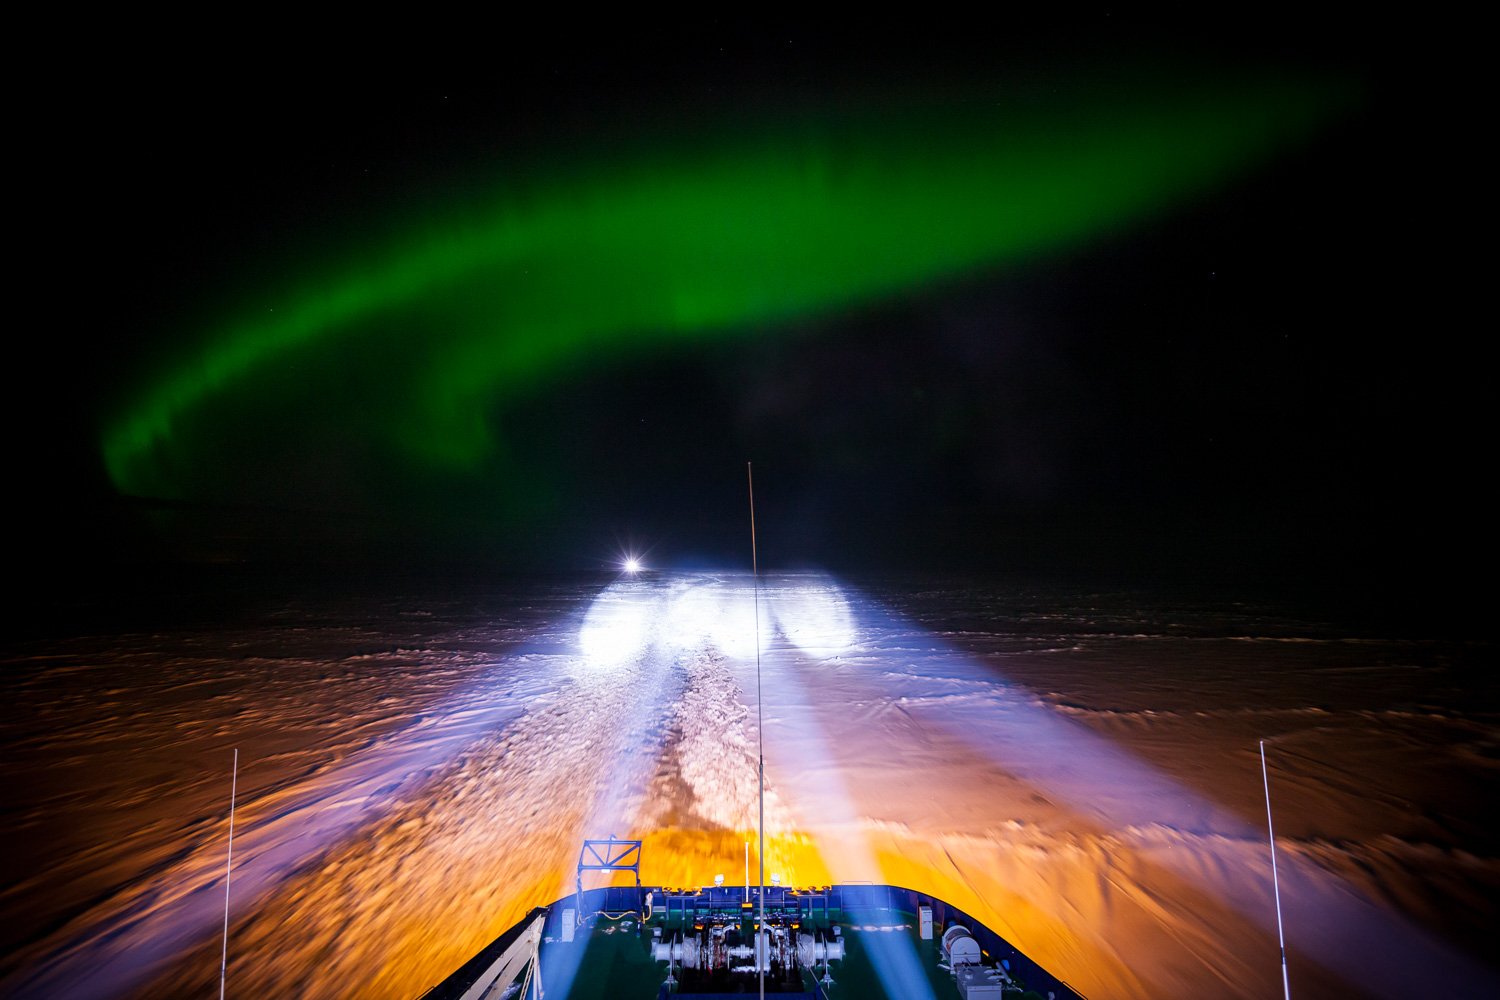 The northern lights are dancing in the polar night and the icebreaker Oden is on its way to meet the icebreaker Atle somewhere in the frozen icy landscape of the Gulf of Bothnia.